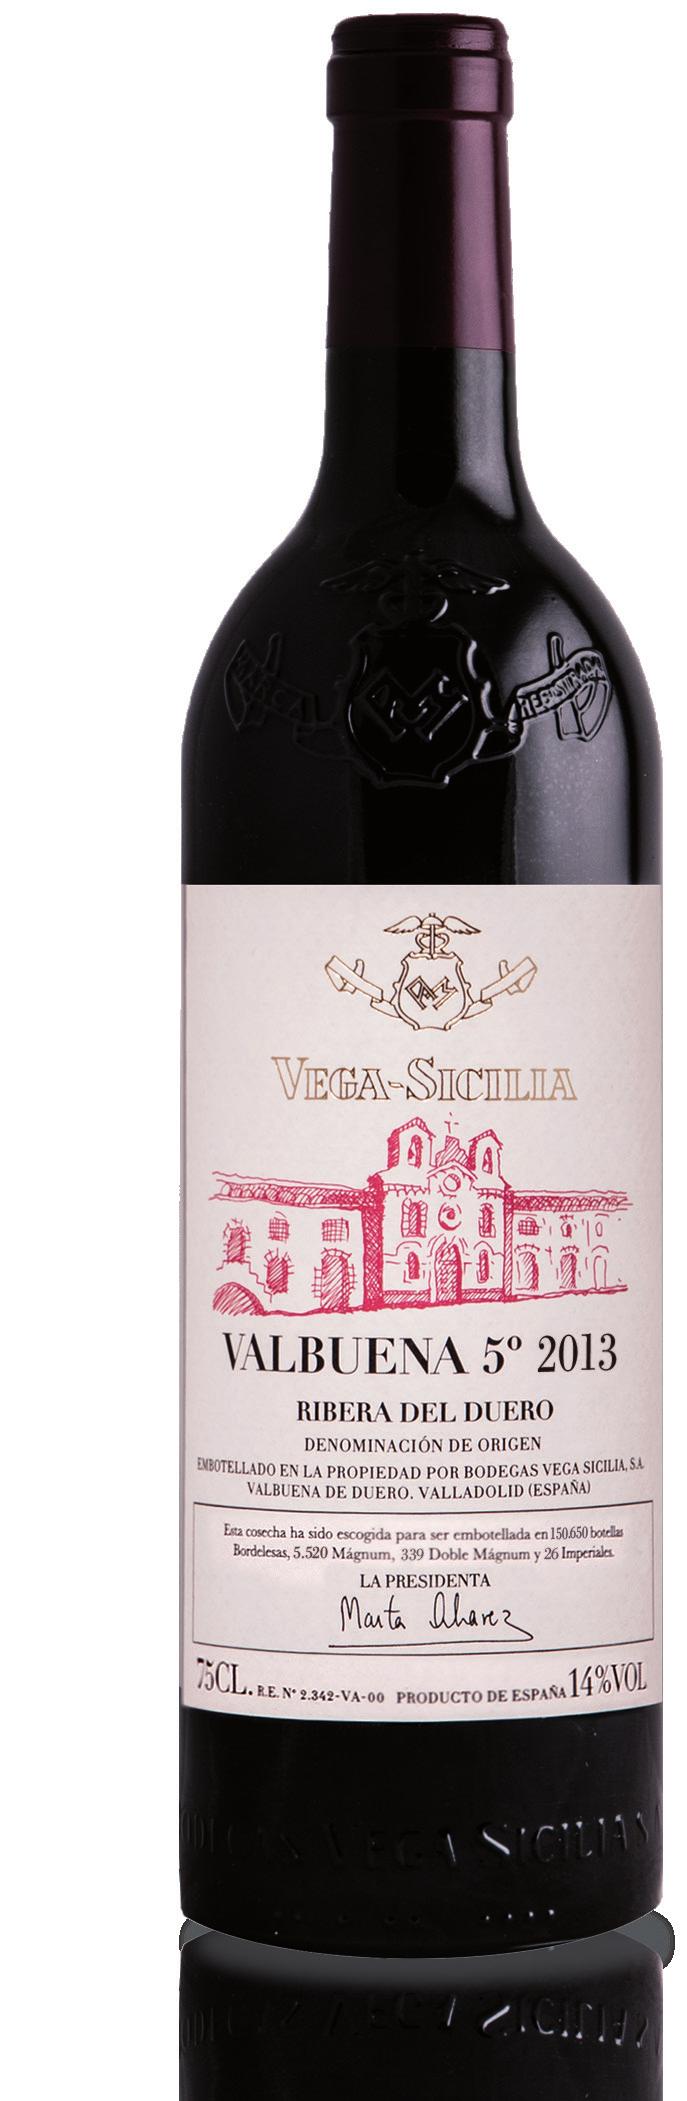 VALBUENA 5º 2013 Valbuena is the pure expression of a red at Vega Sicilia, with an ageing process, from barrel to bottle, which lasts five years and gives its name: Valbuena 5º (5th).